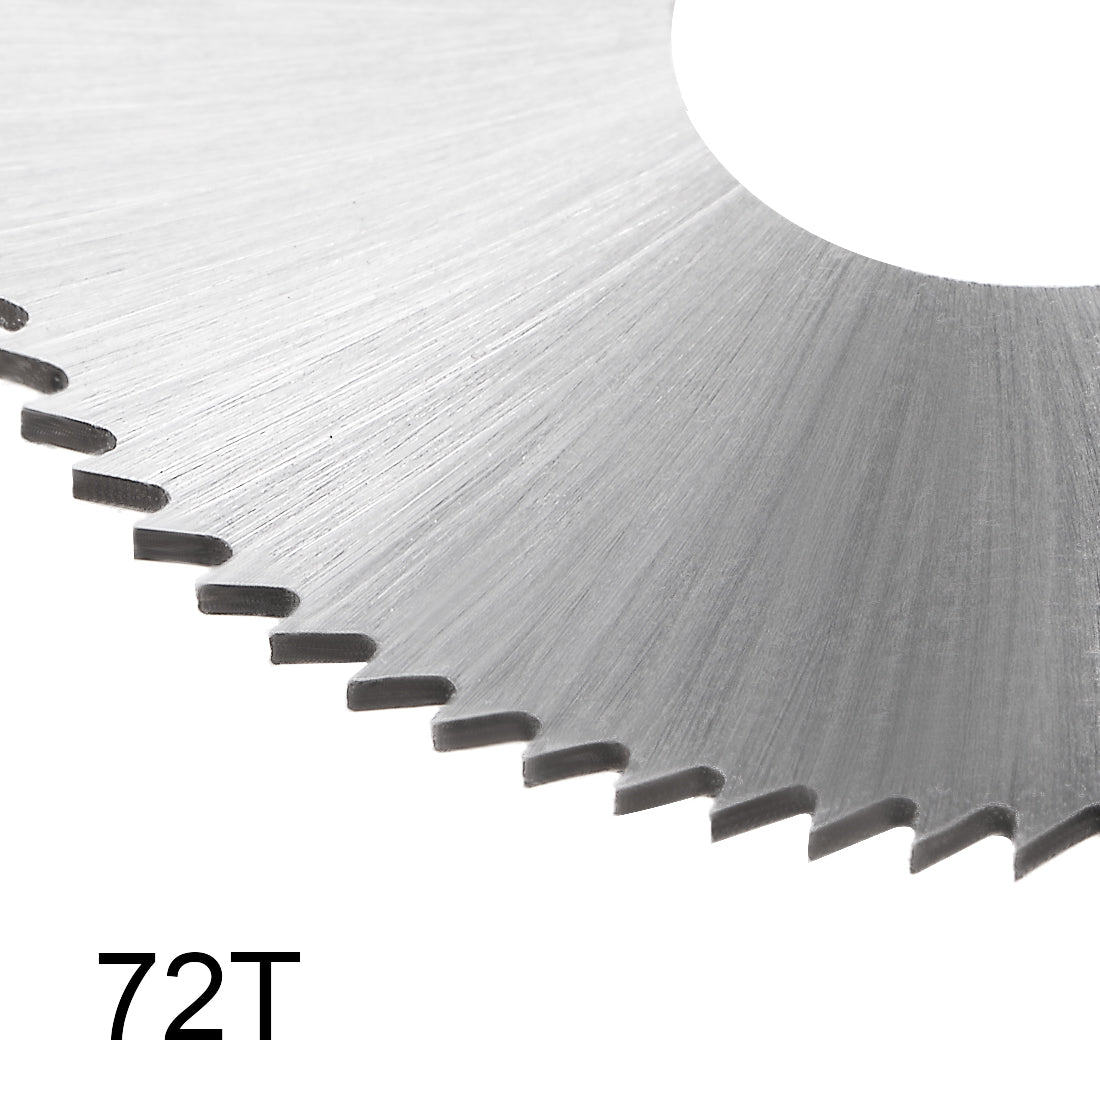 Uxcell Uxcell HSS Saw Blade, 40mm 72 Tooth Circular Cutting Wheel 2.5mm Thick w 13mm Arbor